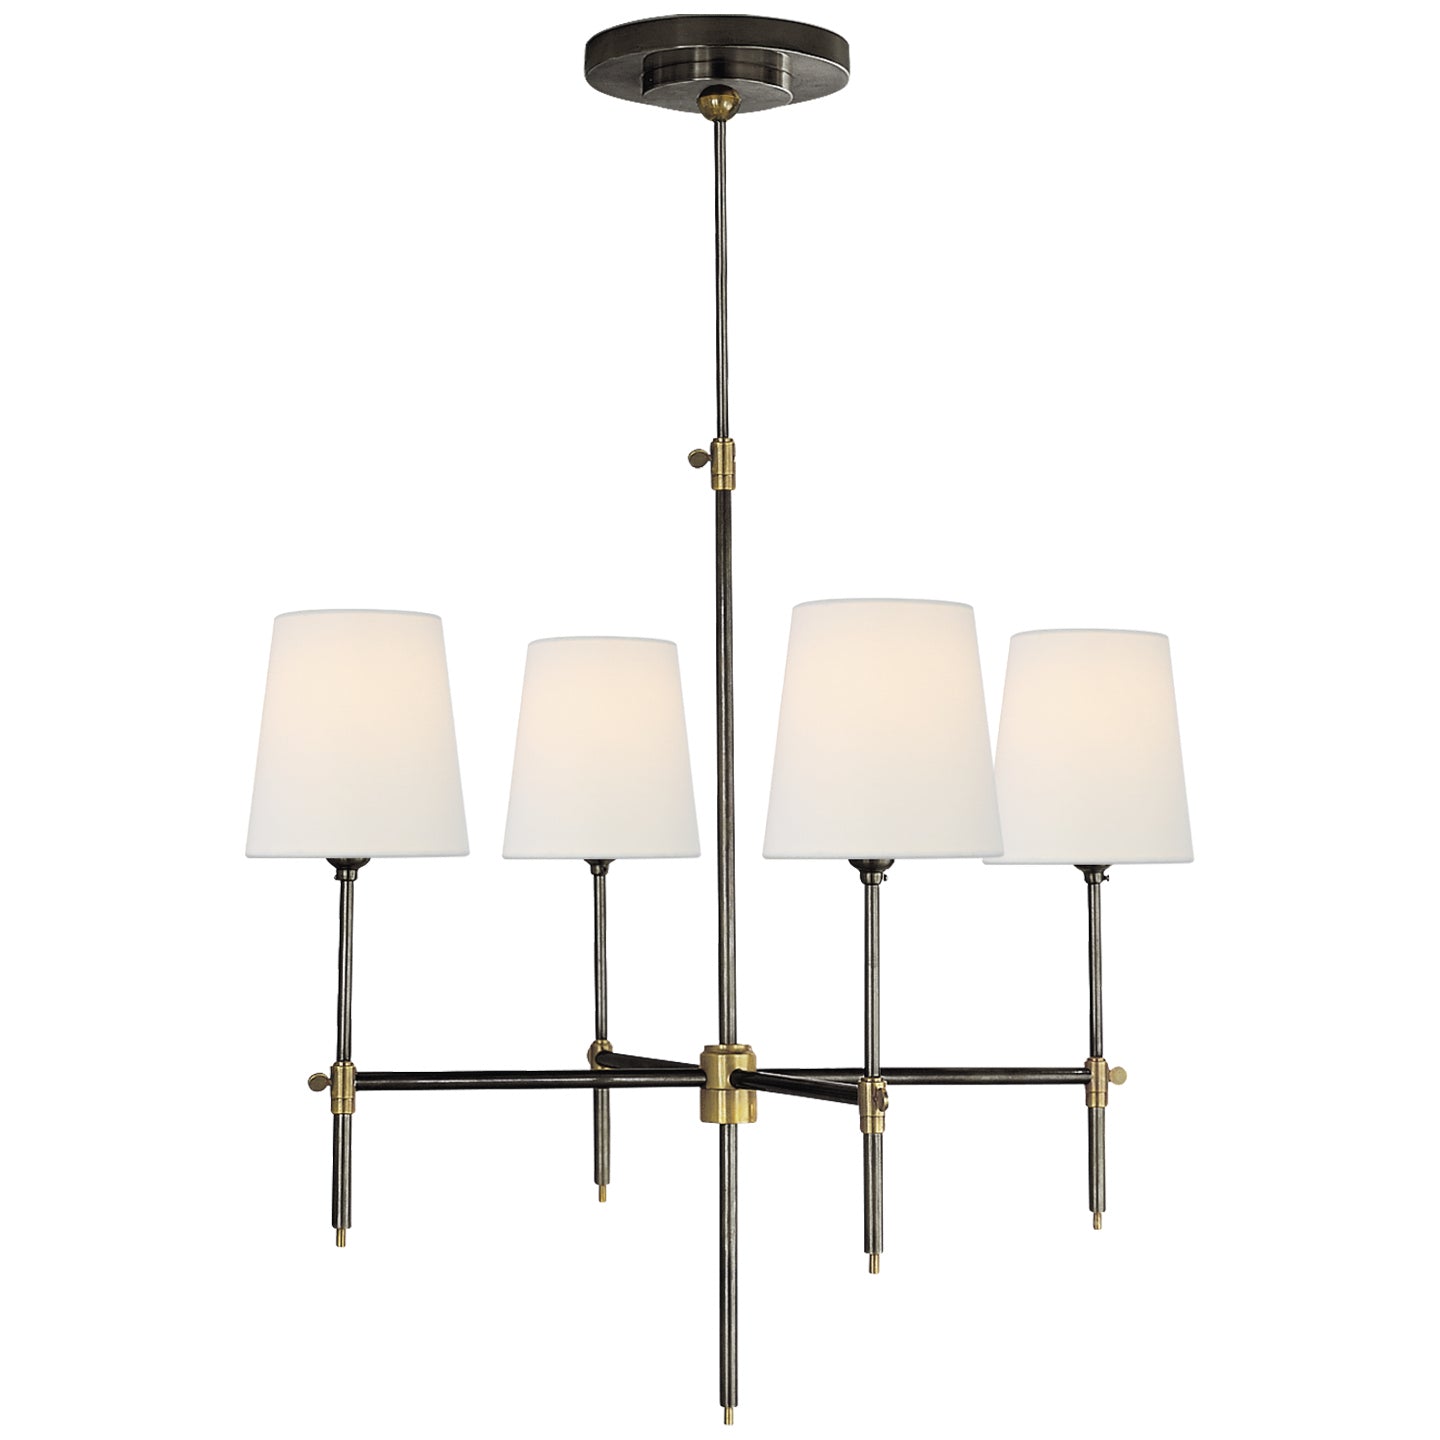 Visual Comfort Signature Canada - Four Light Chandelier - Bryant - Bronze and Hand-Rubbed Antique Brass- Union Lighting Luminaires Decor